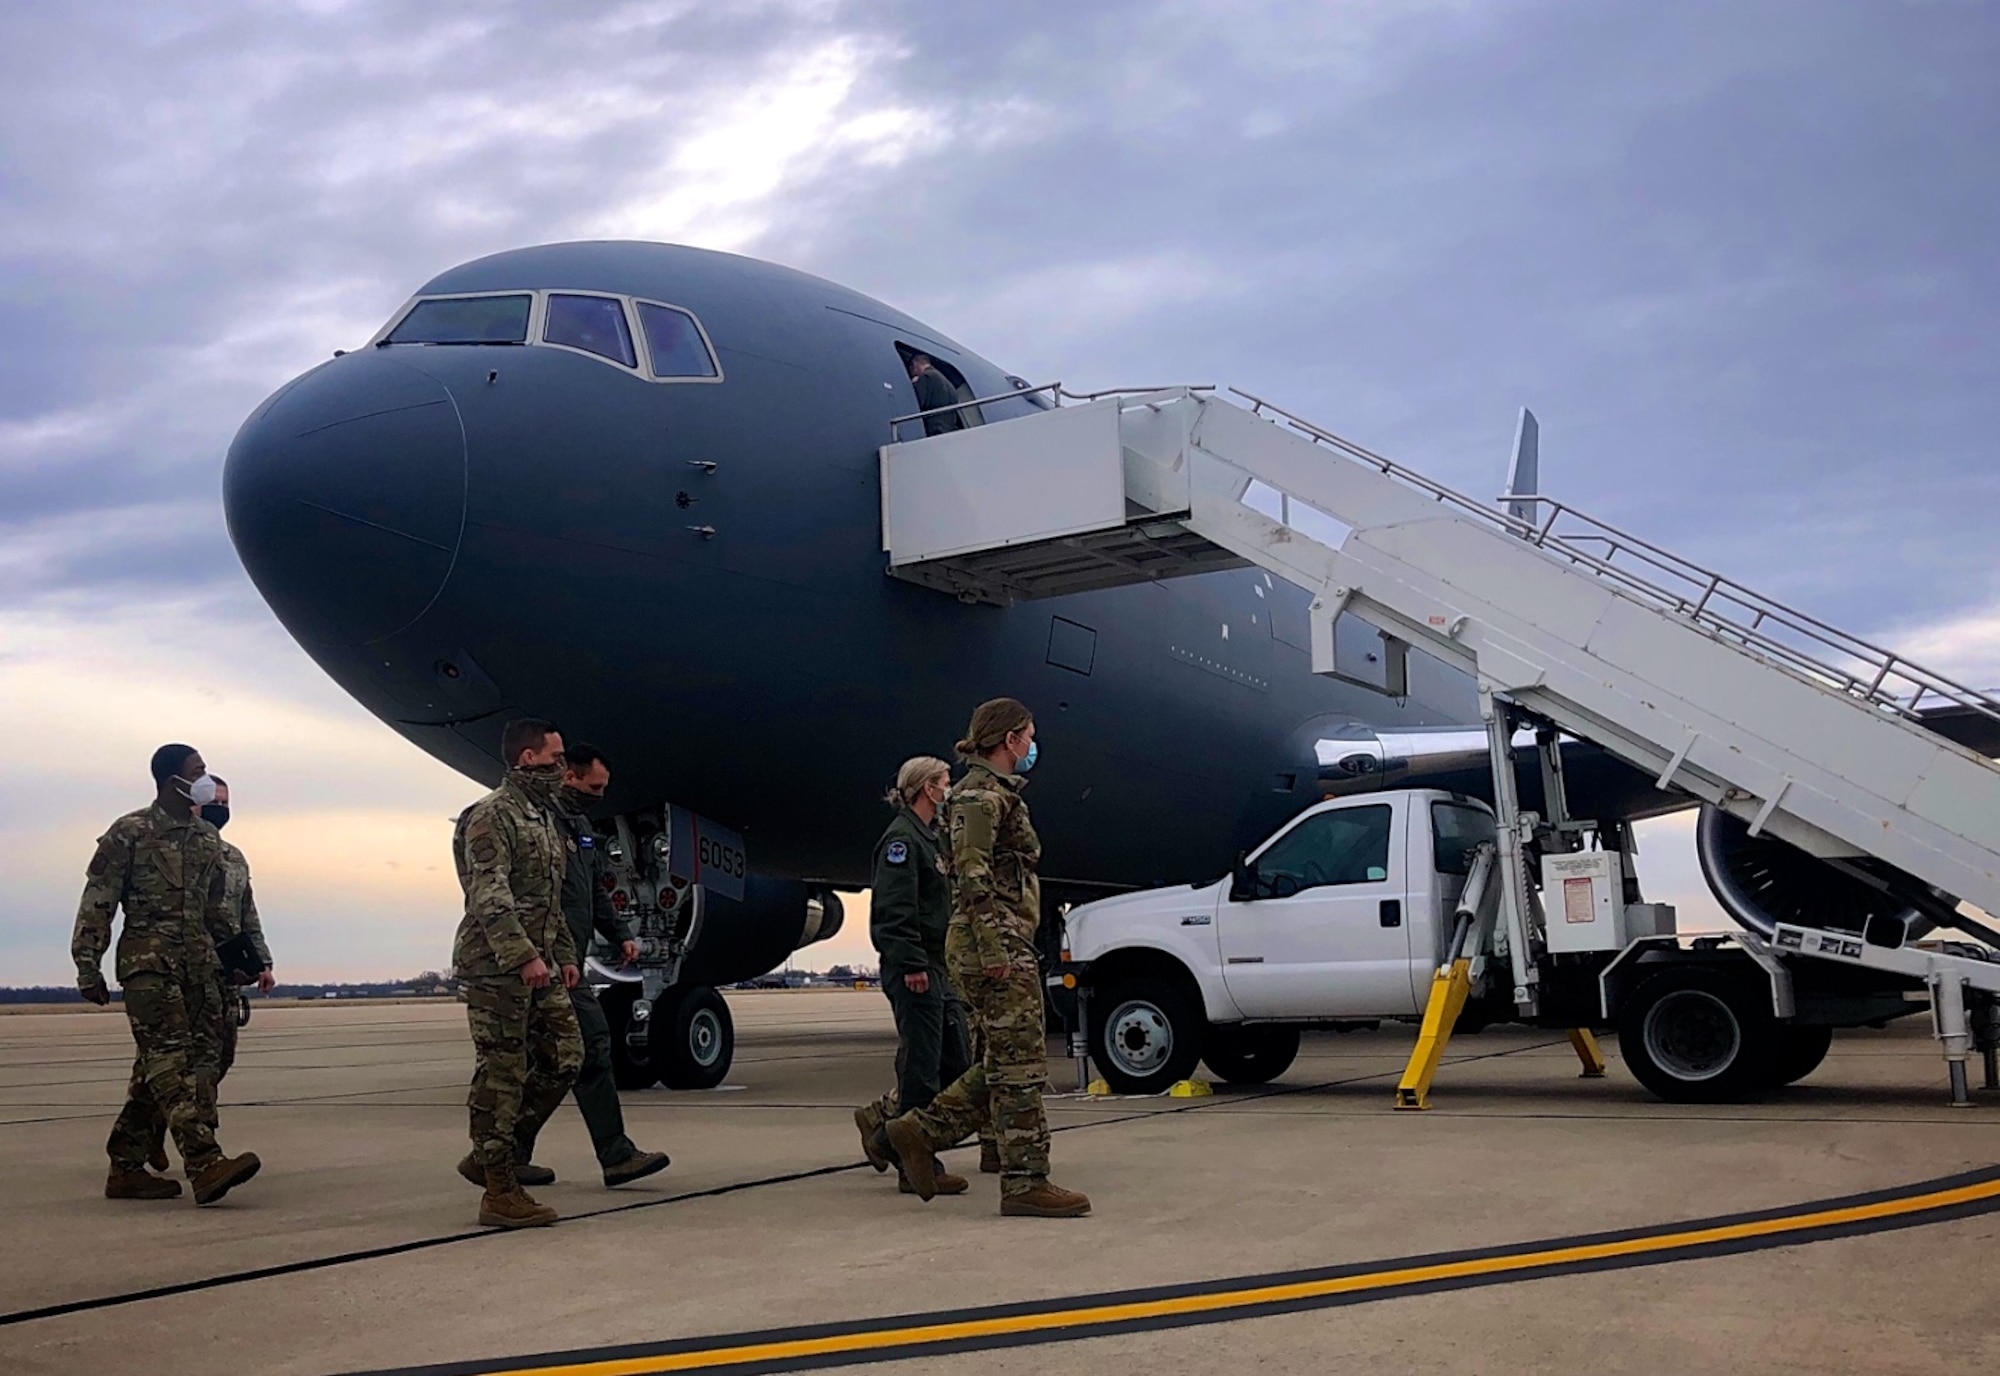 Member of the 932nd Airlift Wing's Aeromedical Evacuation Squadron walk to the stairs of a visiting KC-46 aircraft to get training January 14, 2021, Scott Air Force Base, Ill.  They received crew briefs from aircrew members and had a chance to see how the plane interior and equipment differs from other aircraft they have flown on.  Master Sgt. Anisa Thomas, 932nd Aeromedical Evacuation Squadron said, "as ground personnel we're learning about how we can enter and assist with loading our equipment and work better with crews."  The reserve Citizen Airmen familiarized themselves on the KC-46 Pegasus, as the training helped strengthen and enhance their patient care skills.  During this training they had a chance to ask questions and learn directly from a flight crew with the 157th Air Refueling Wing from Pease Air National ,Guard Base, N.H.  (U.S. Air Force photo by Lt. Col. Stan Paregien)